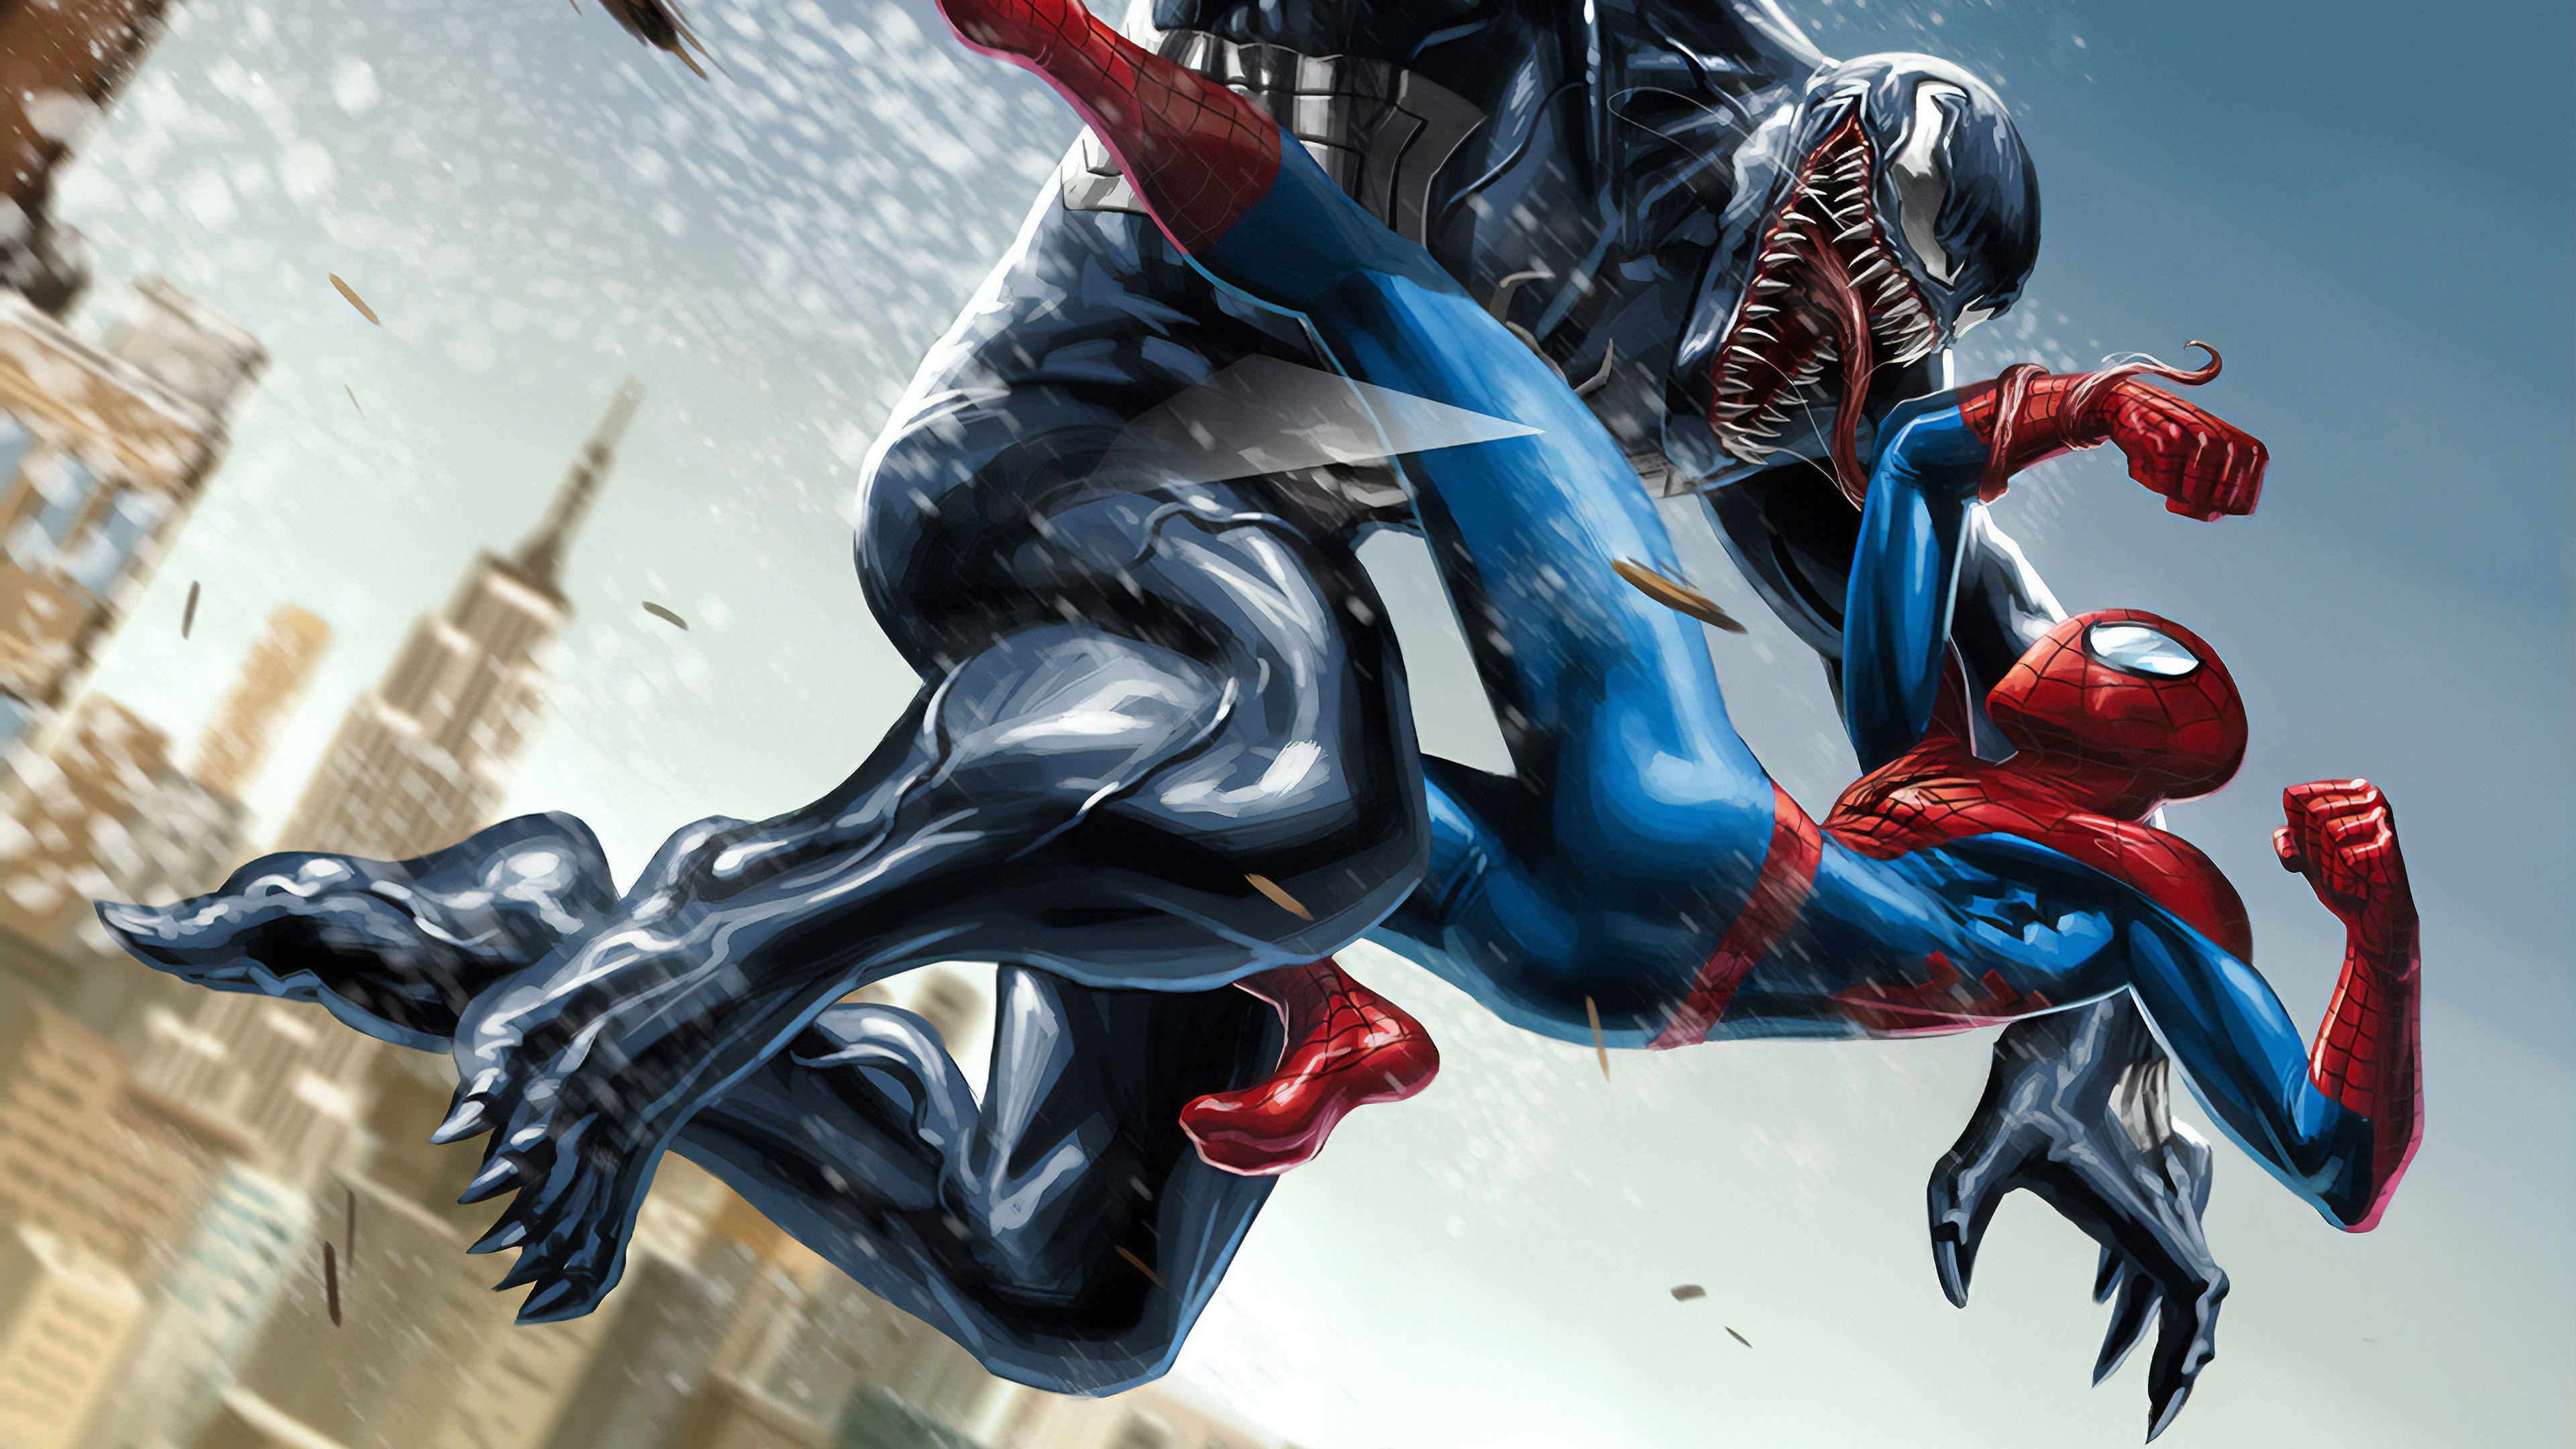 4k Spider Man Vs Venom HD Superheroes 4k Wallpapers Images Backgrounds  Photos and Pictures